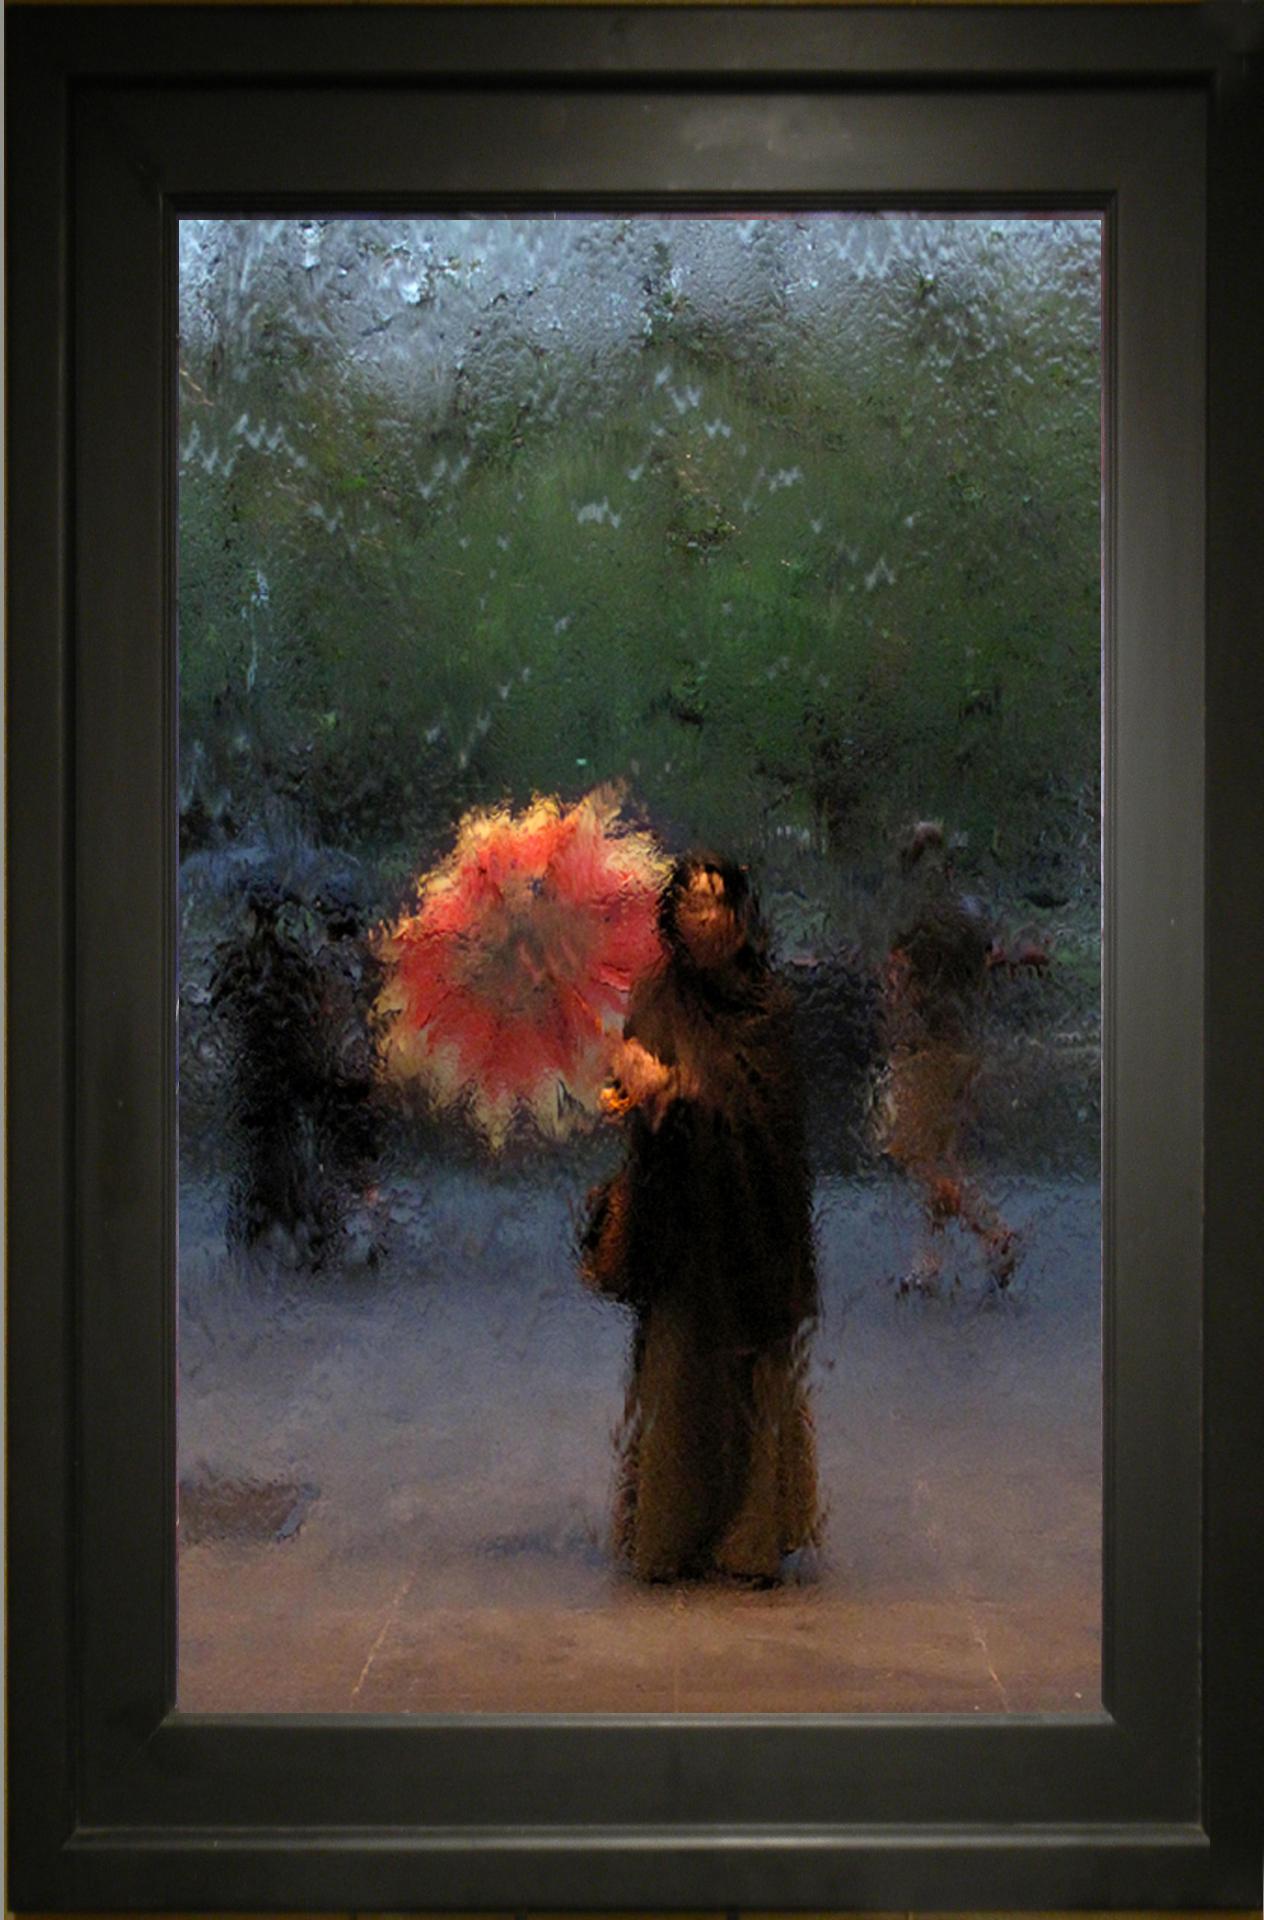 Denny Haskew Abstract Photograph - Flowered Umbrella